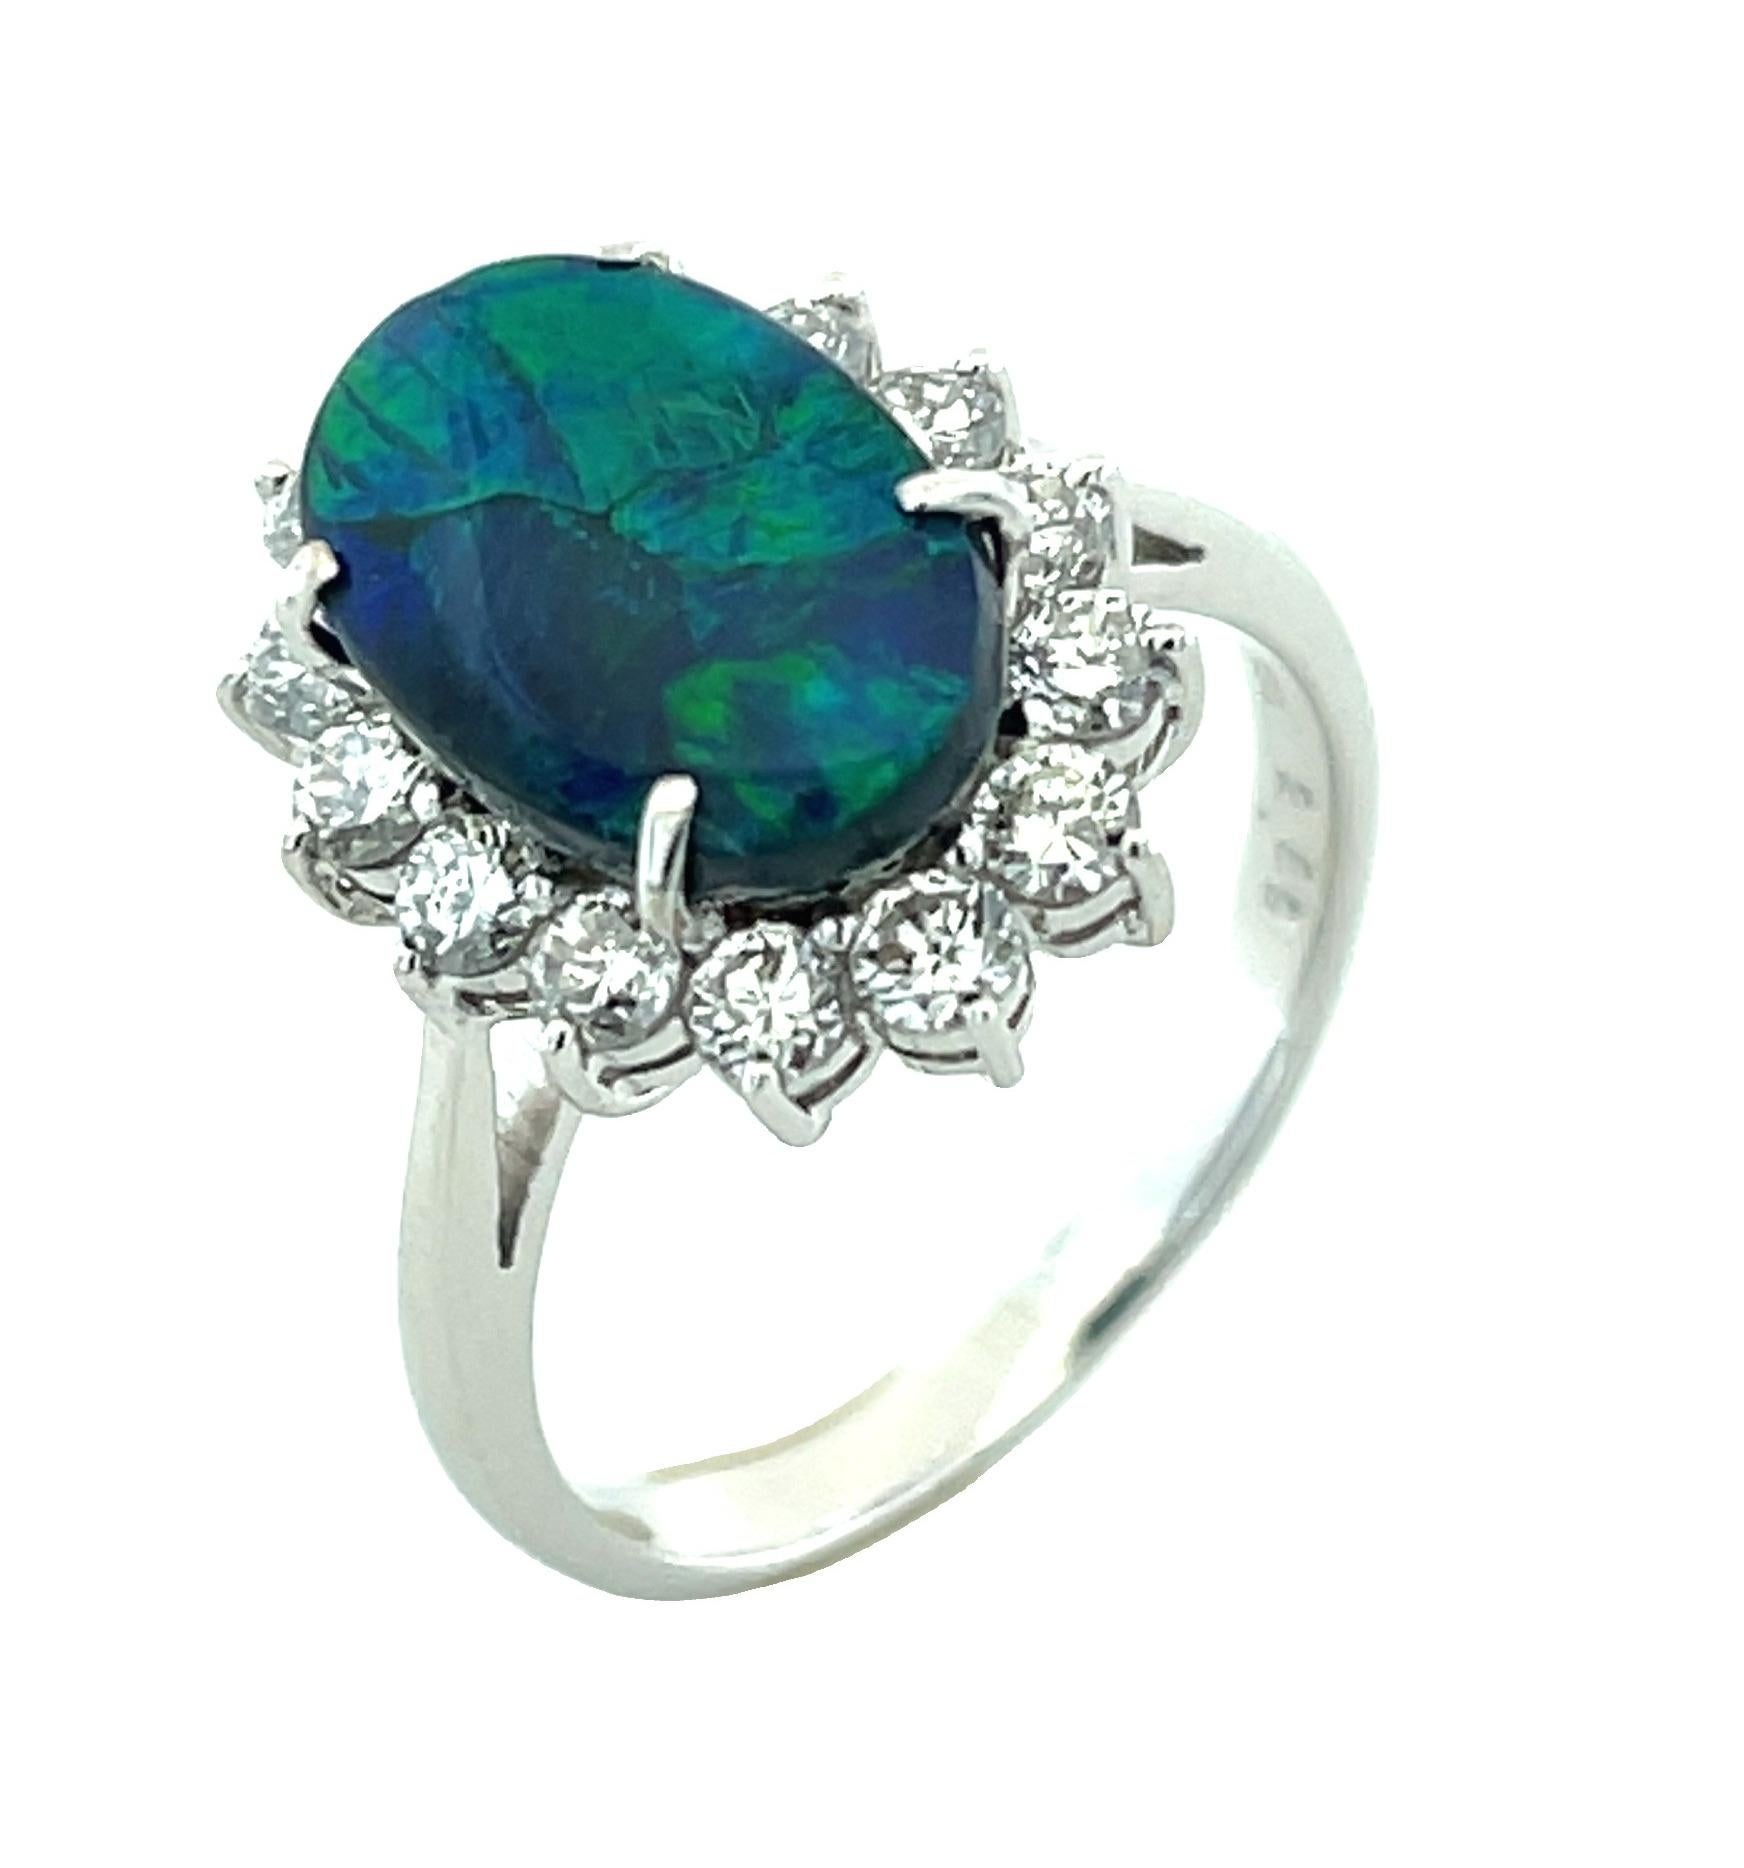 This stunning black opal and diamond cocktail ring features a gorgeous 2.96 carat black opal with vibrant play-of-color surrounded by a halo of white diamonds! The black opal is a phenomenally fine gemstone, displaying large, primarily neon green